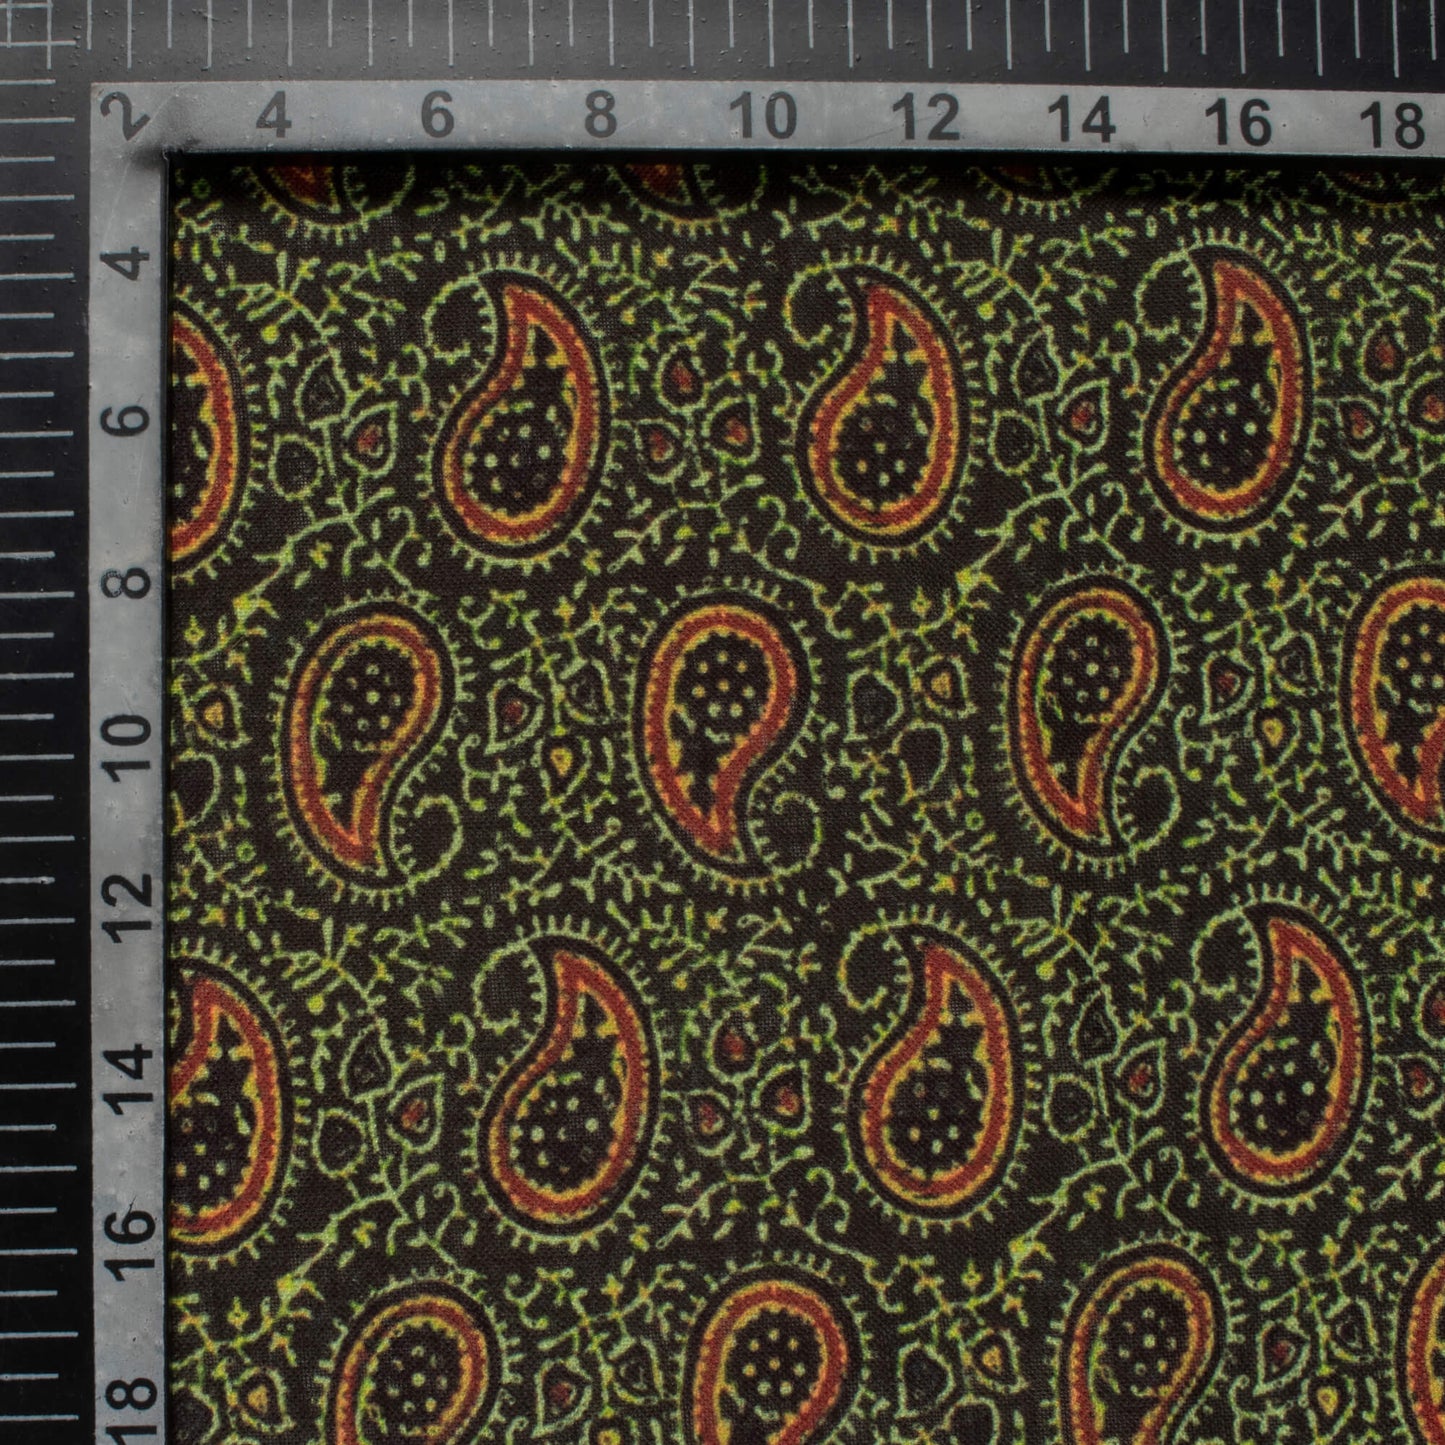 Black And Fern Green Paisley Pattern Digital Print Linen Textured Fabric (Width 56 Inches)